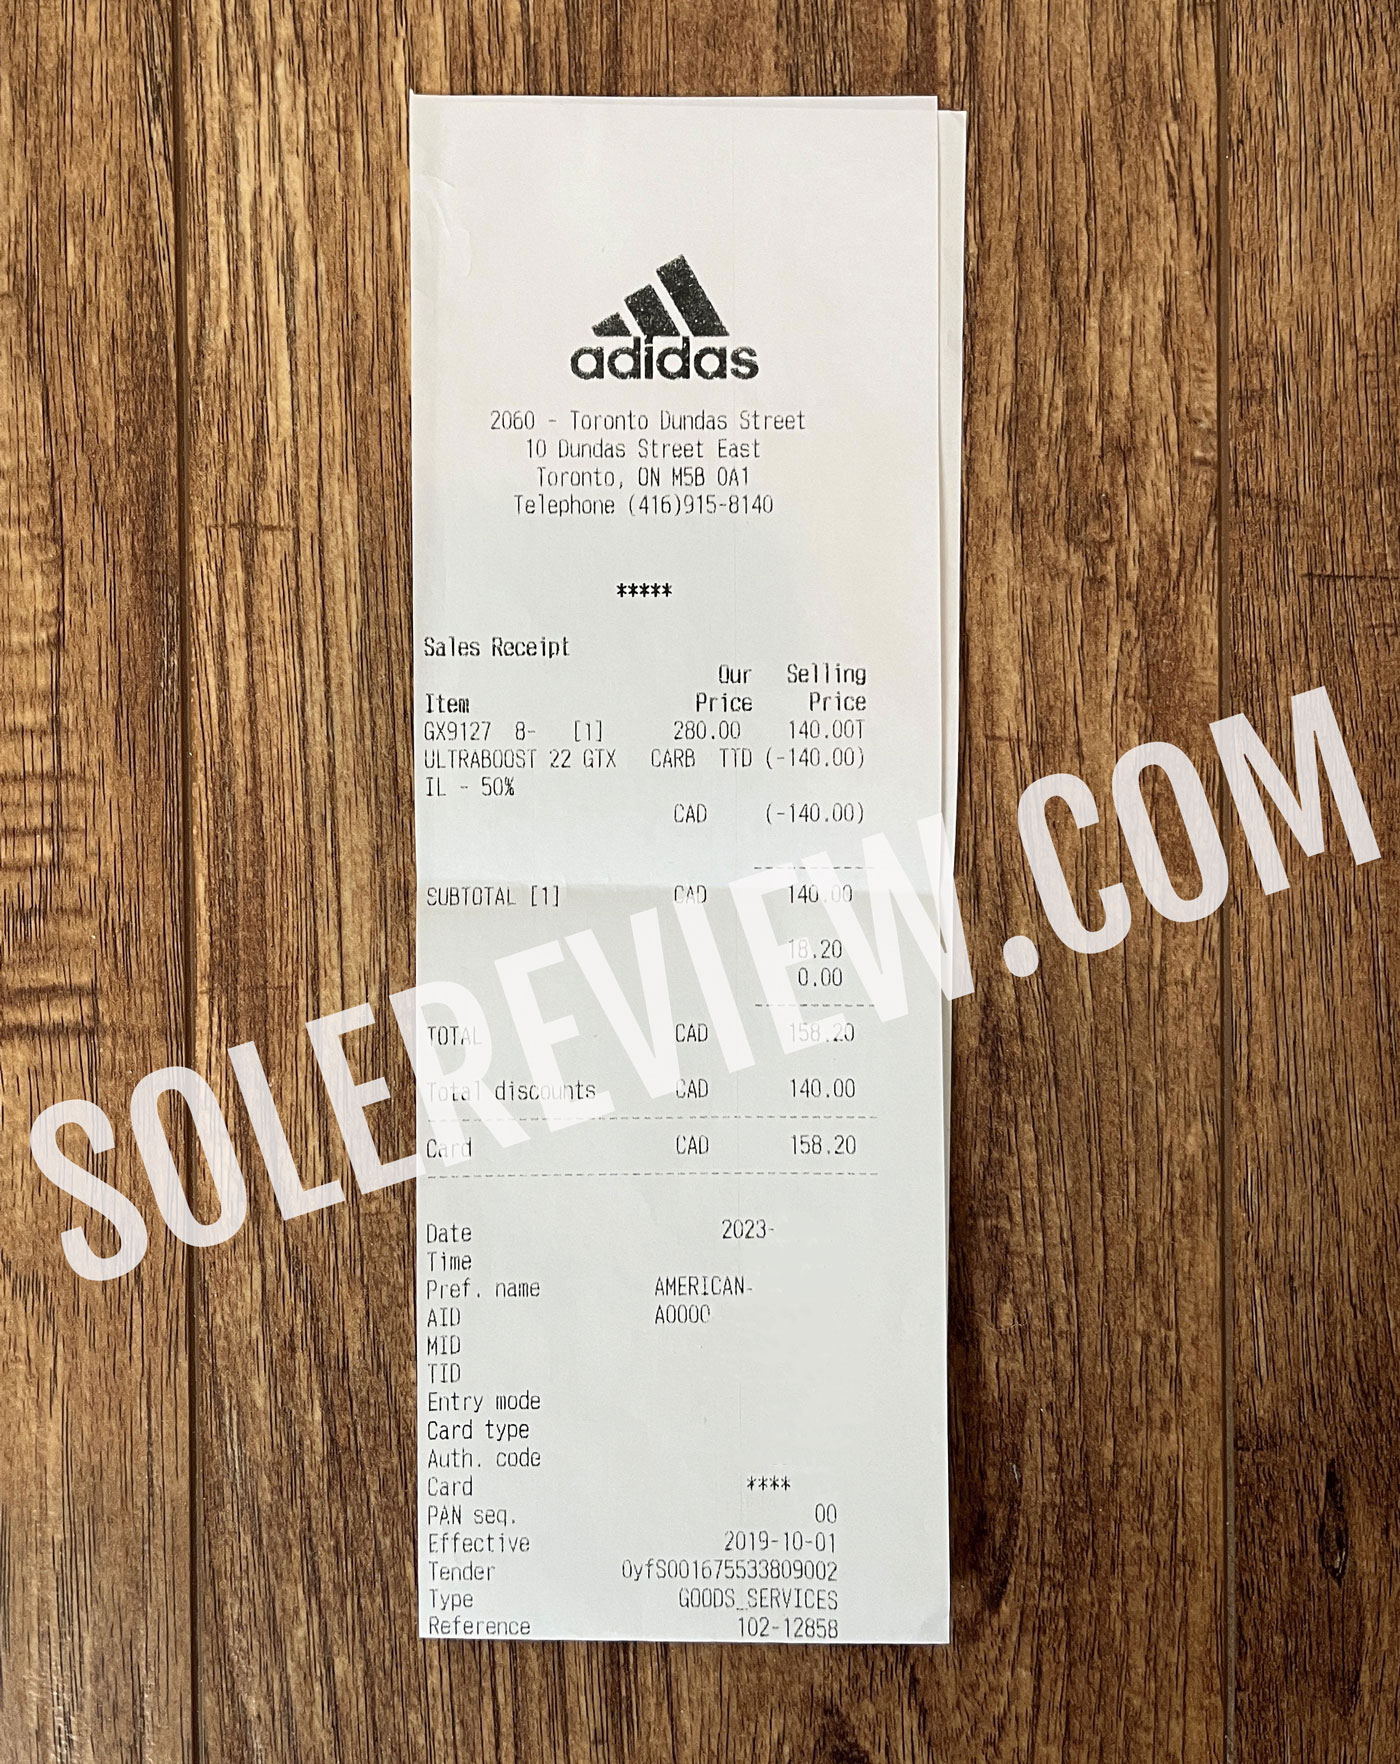 Proof of purchase for the Ultraboost 22 Gore-Tex.